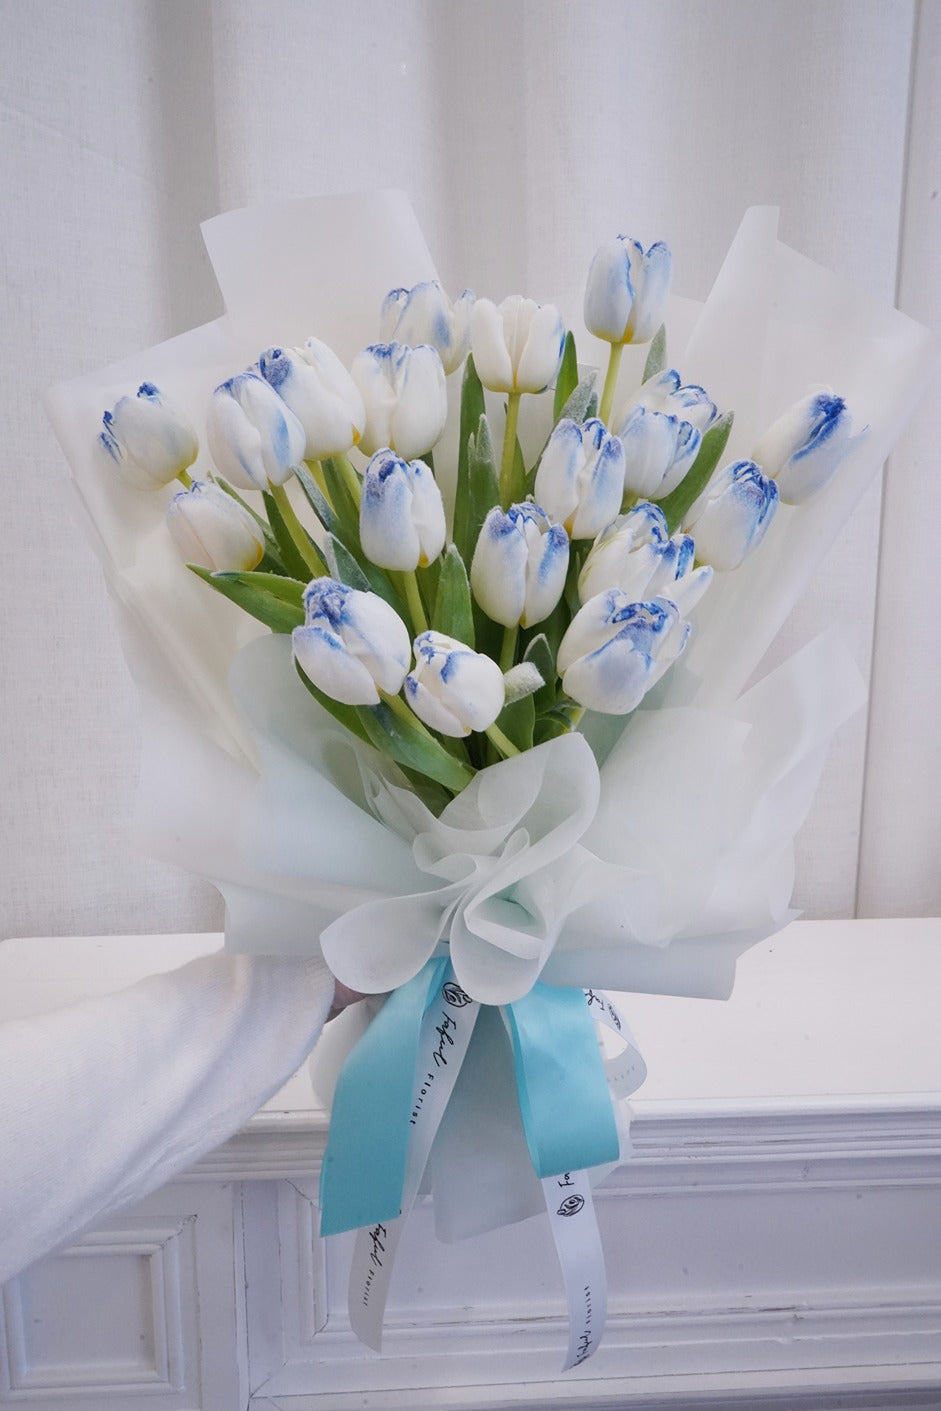 "Snowflake Flowers" - A delicate arrangement featuring frozen tulips reminiscent of snowflakes, perfect flowers for flower delivery in Hong Kong.